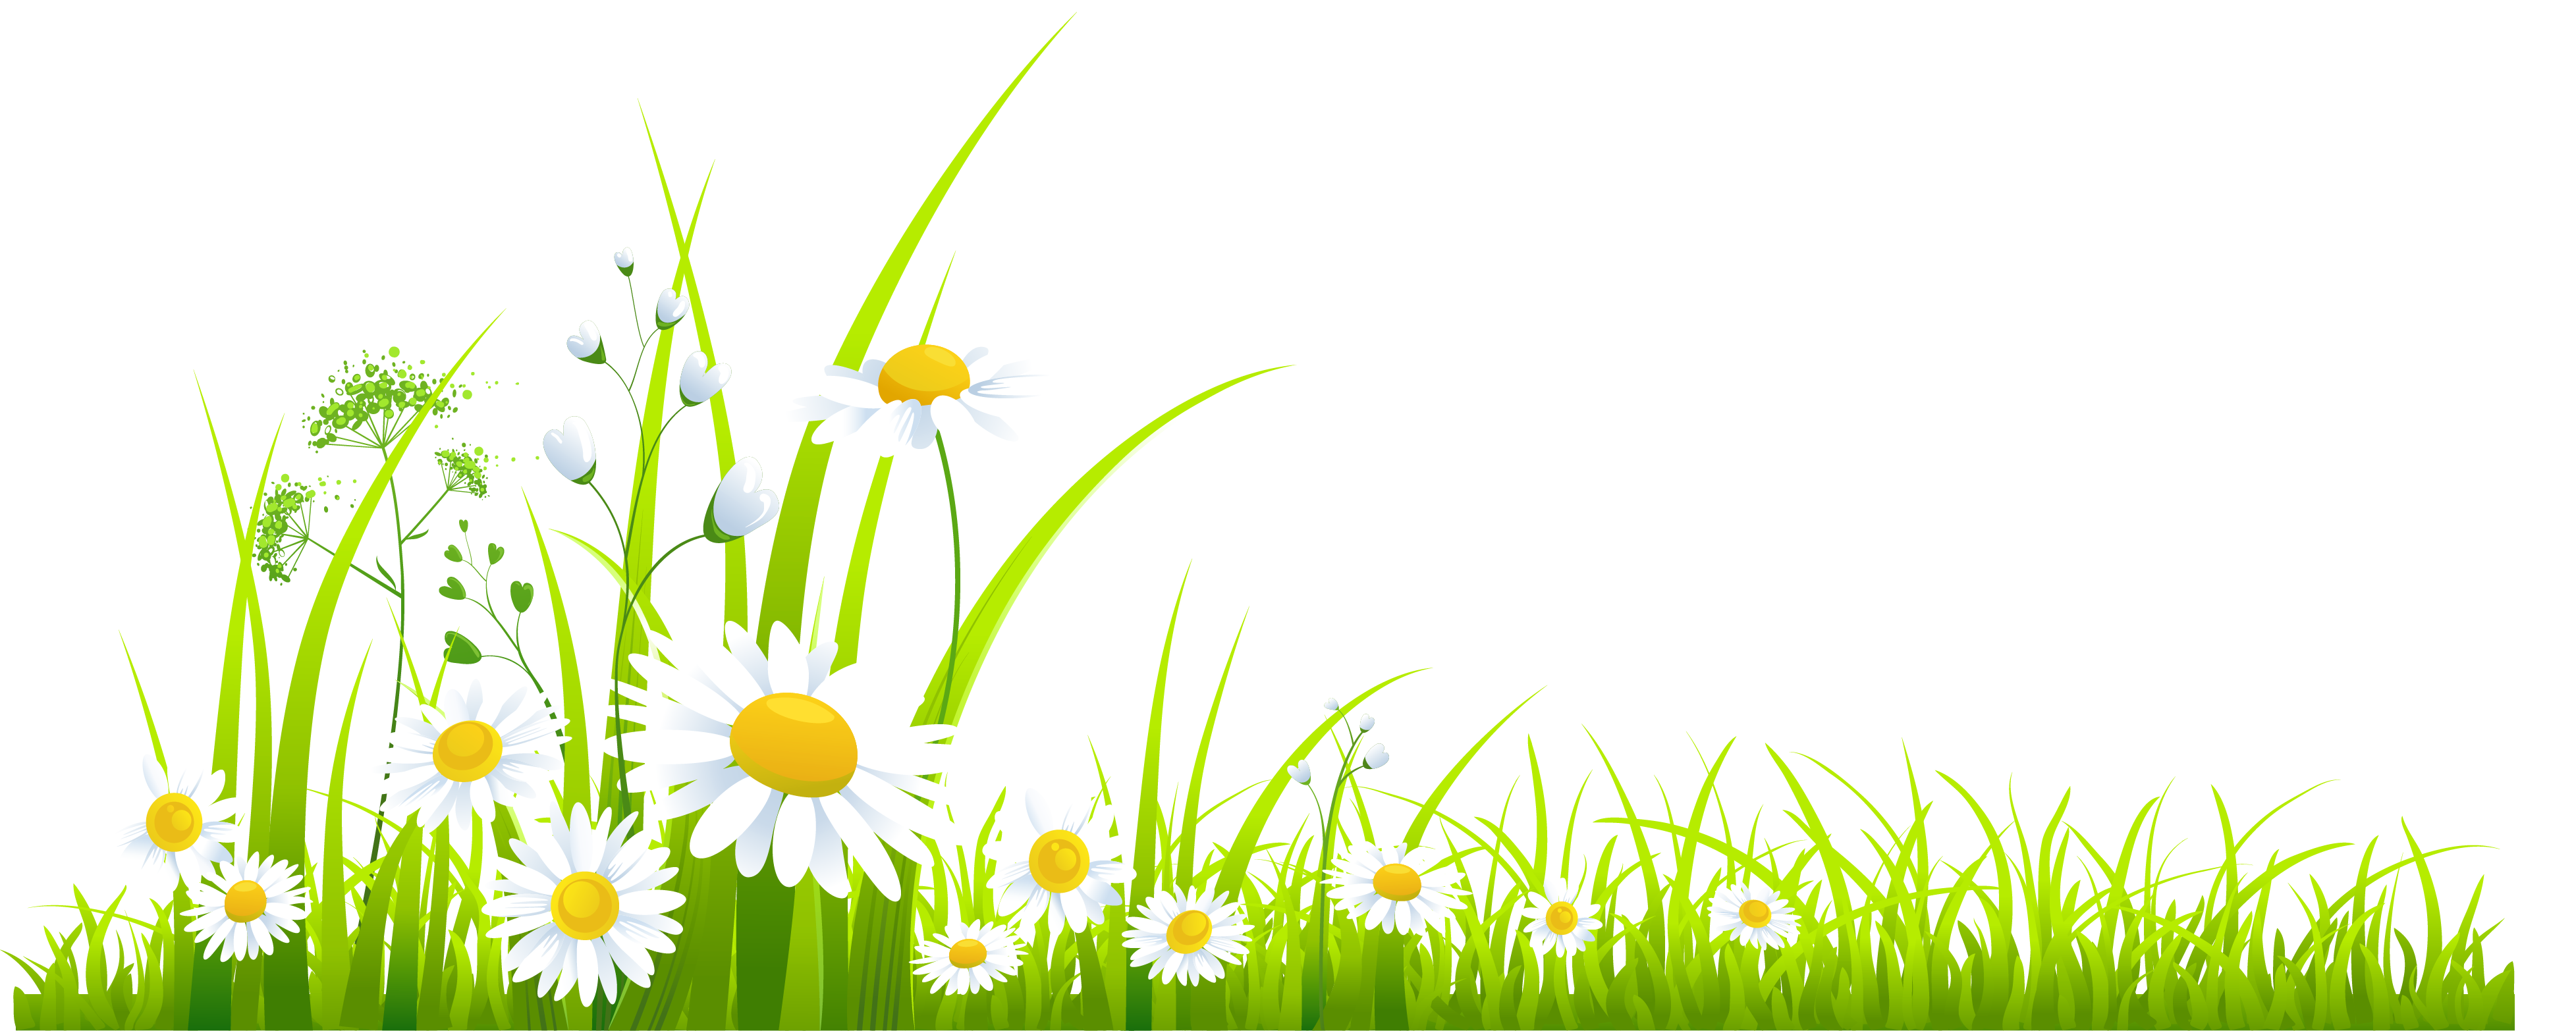 Spring Grass Free Download Clipart